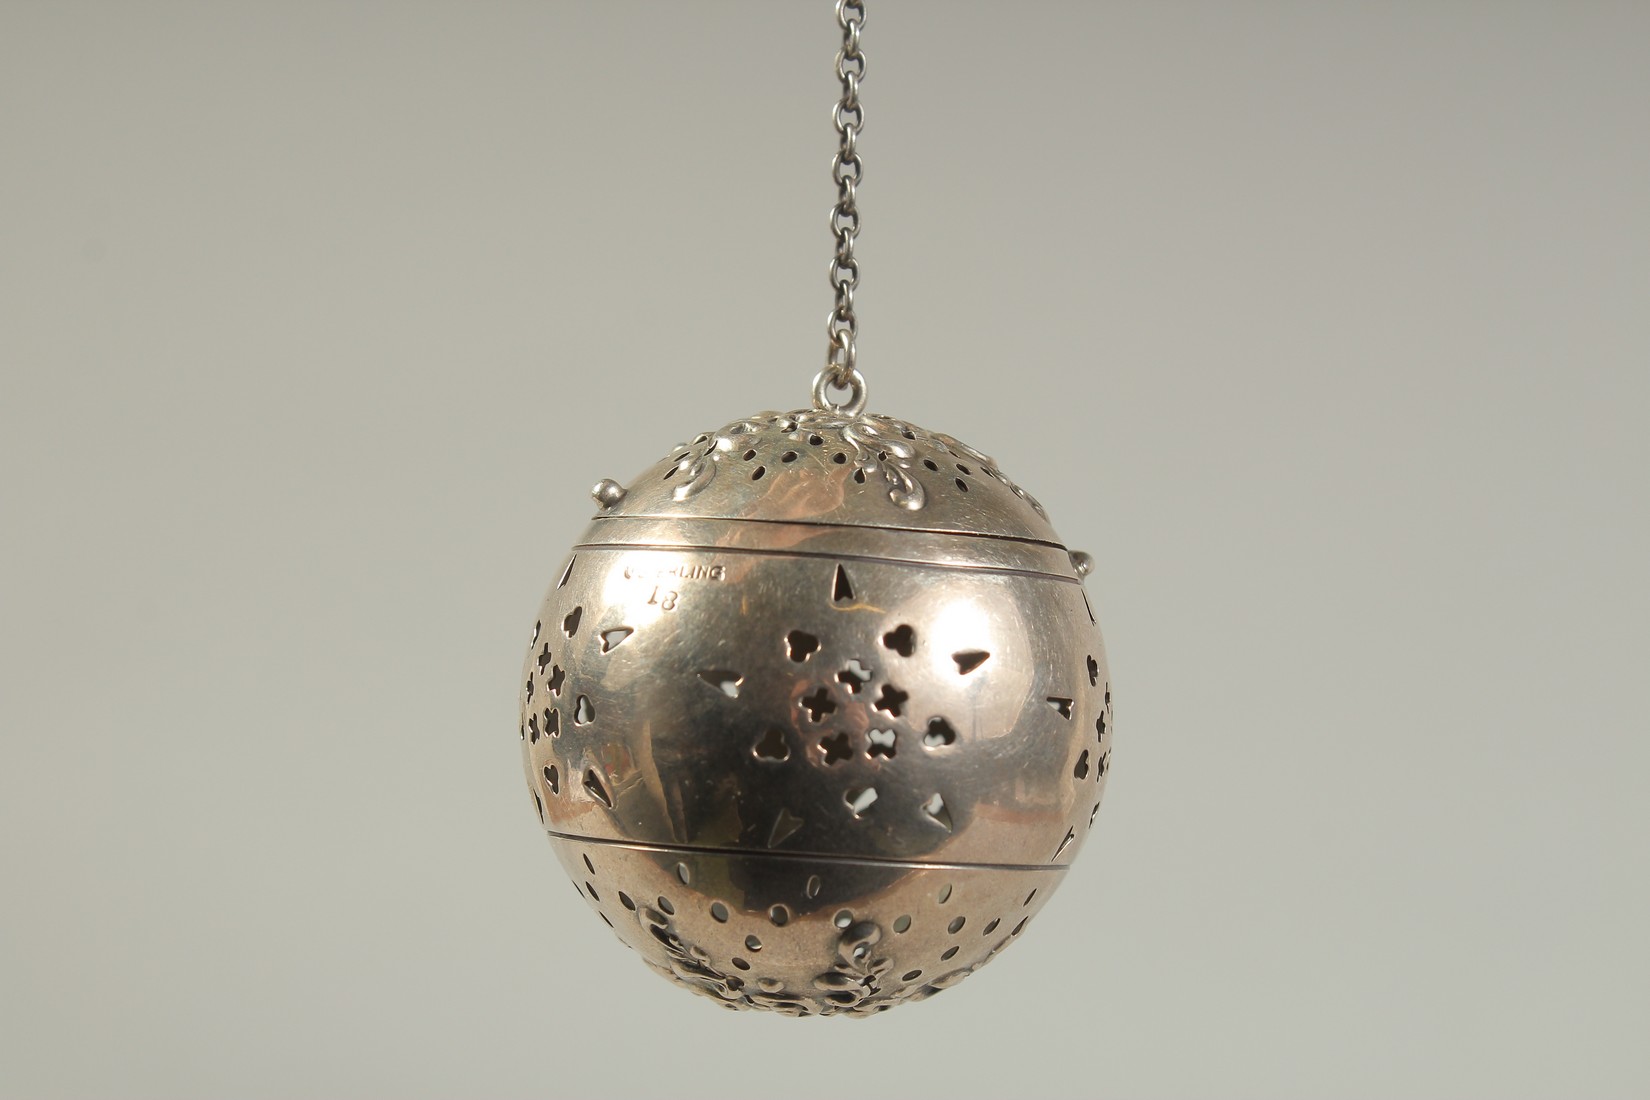 A SILVER GLOBULAR TEA INFUSER on a chain. 1.75ins diameter. - Image 3 of 4